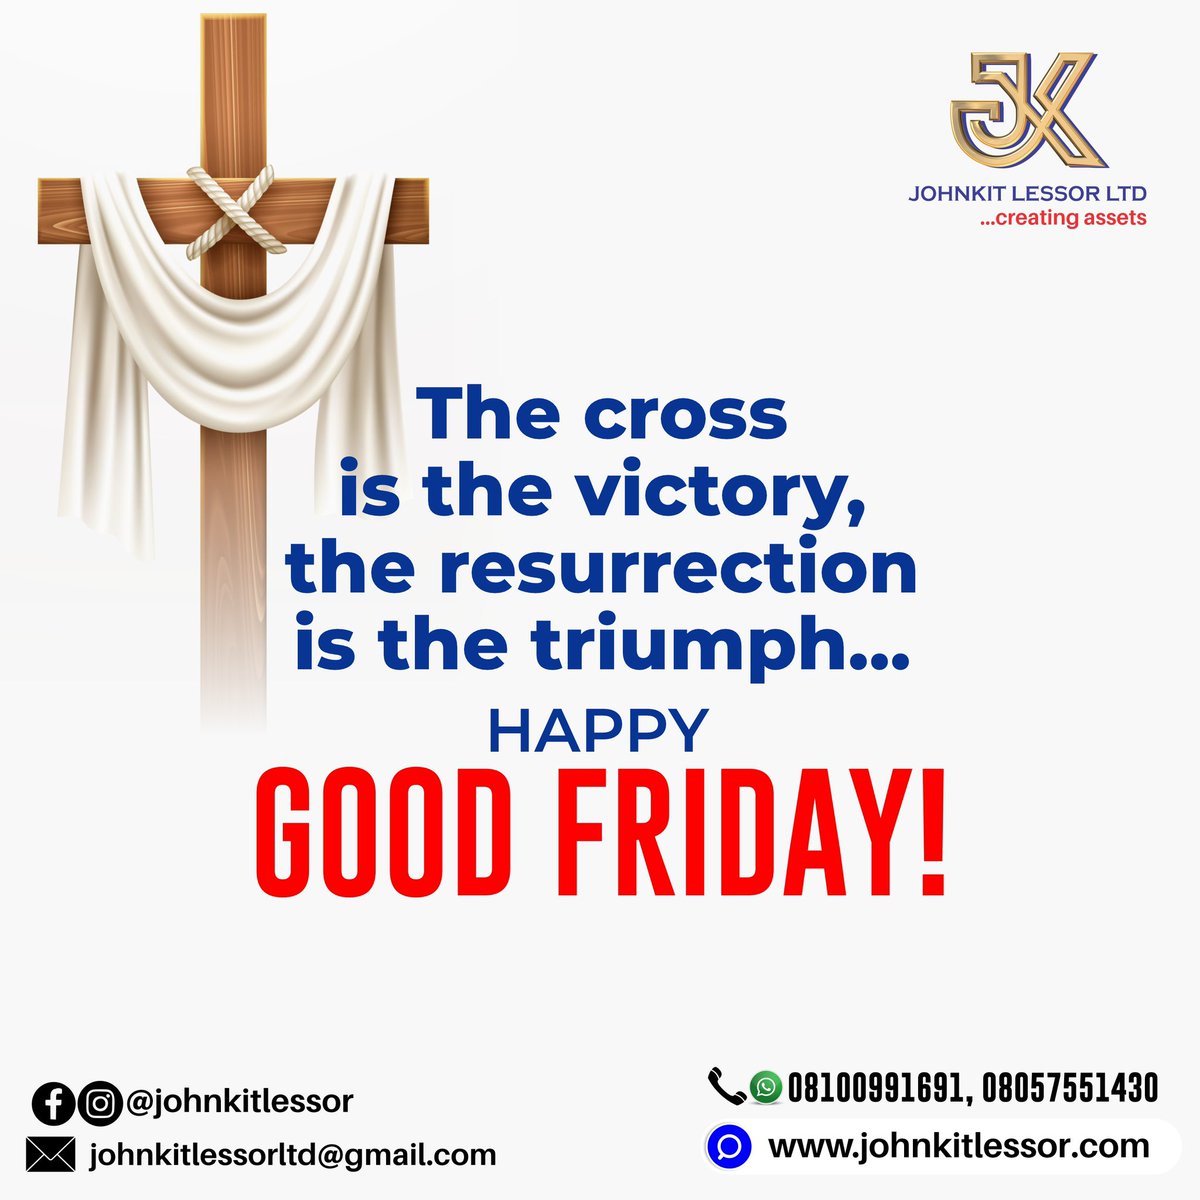 Have a blessed Good Friday!

#goodfriday #lease #leaseplan #leasing #buynow #vehicle #carleasing #buynowpaylater #vehicleleasing #leasecars #ramadan #equipmentleasing #equipmentloans #leasenow